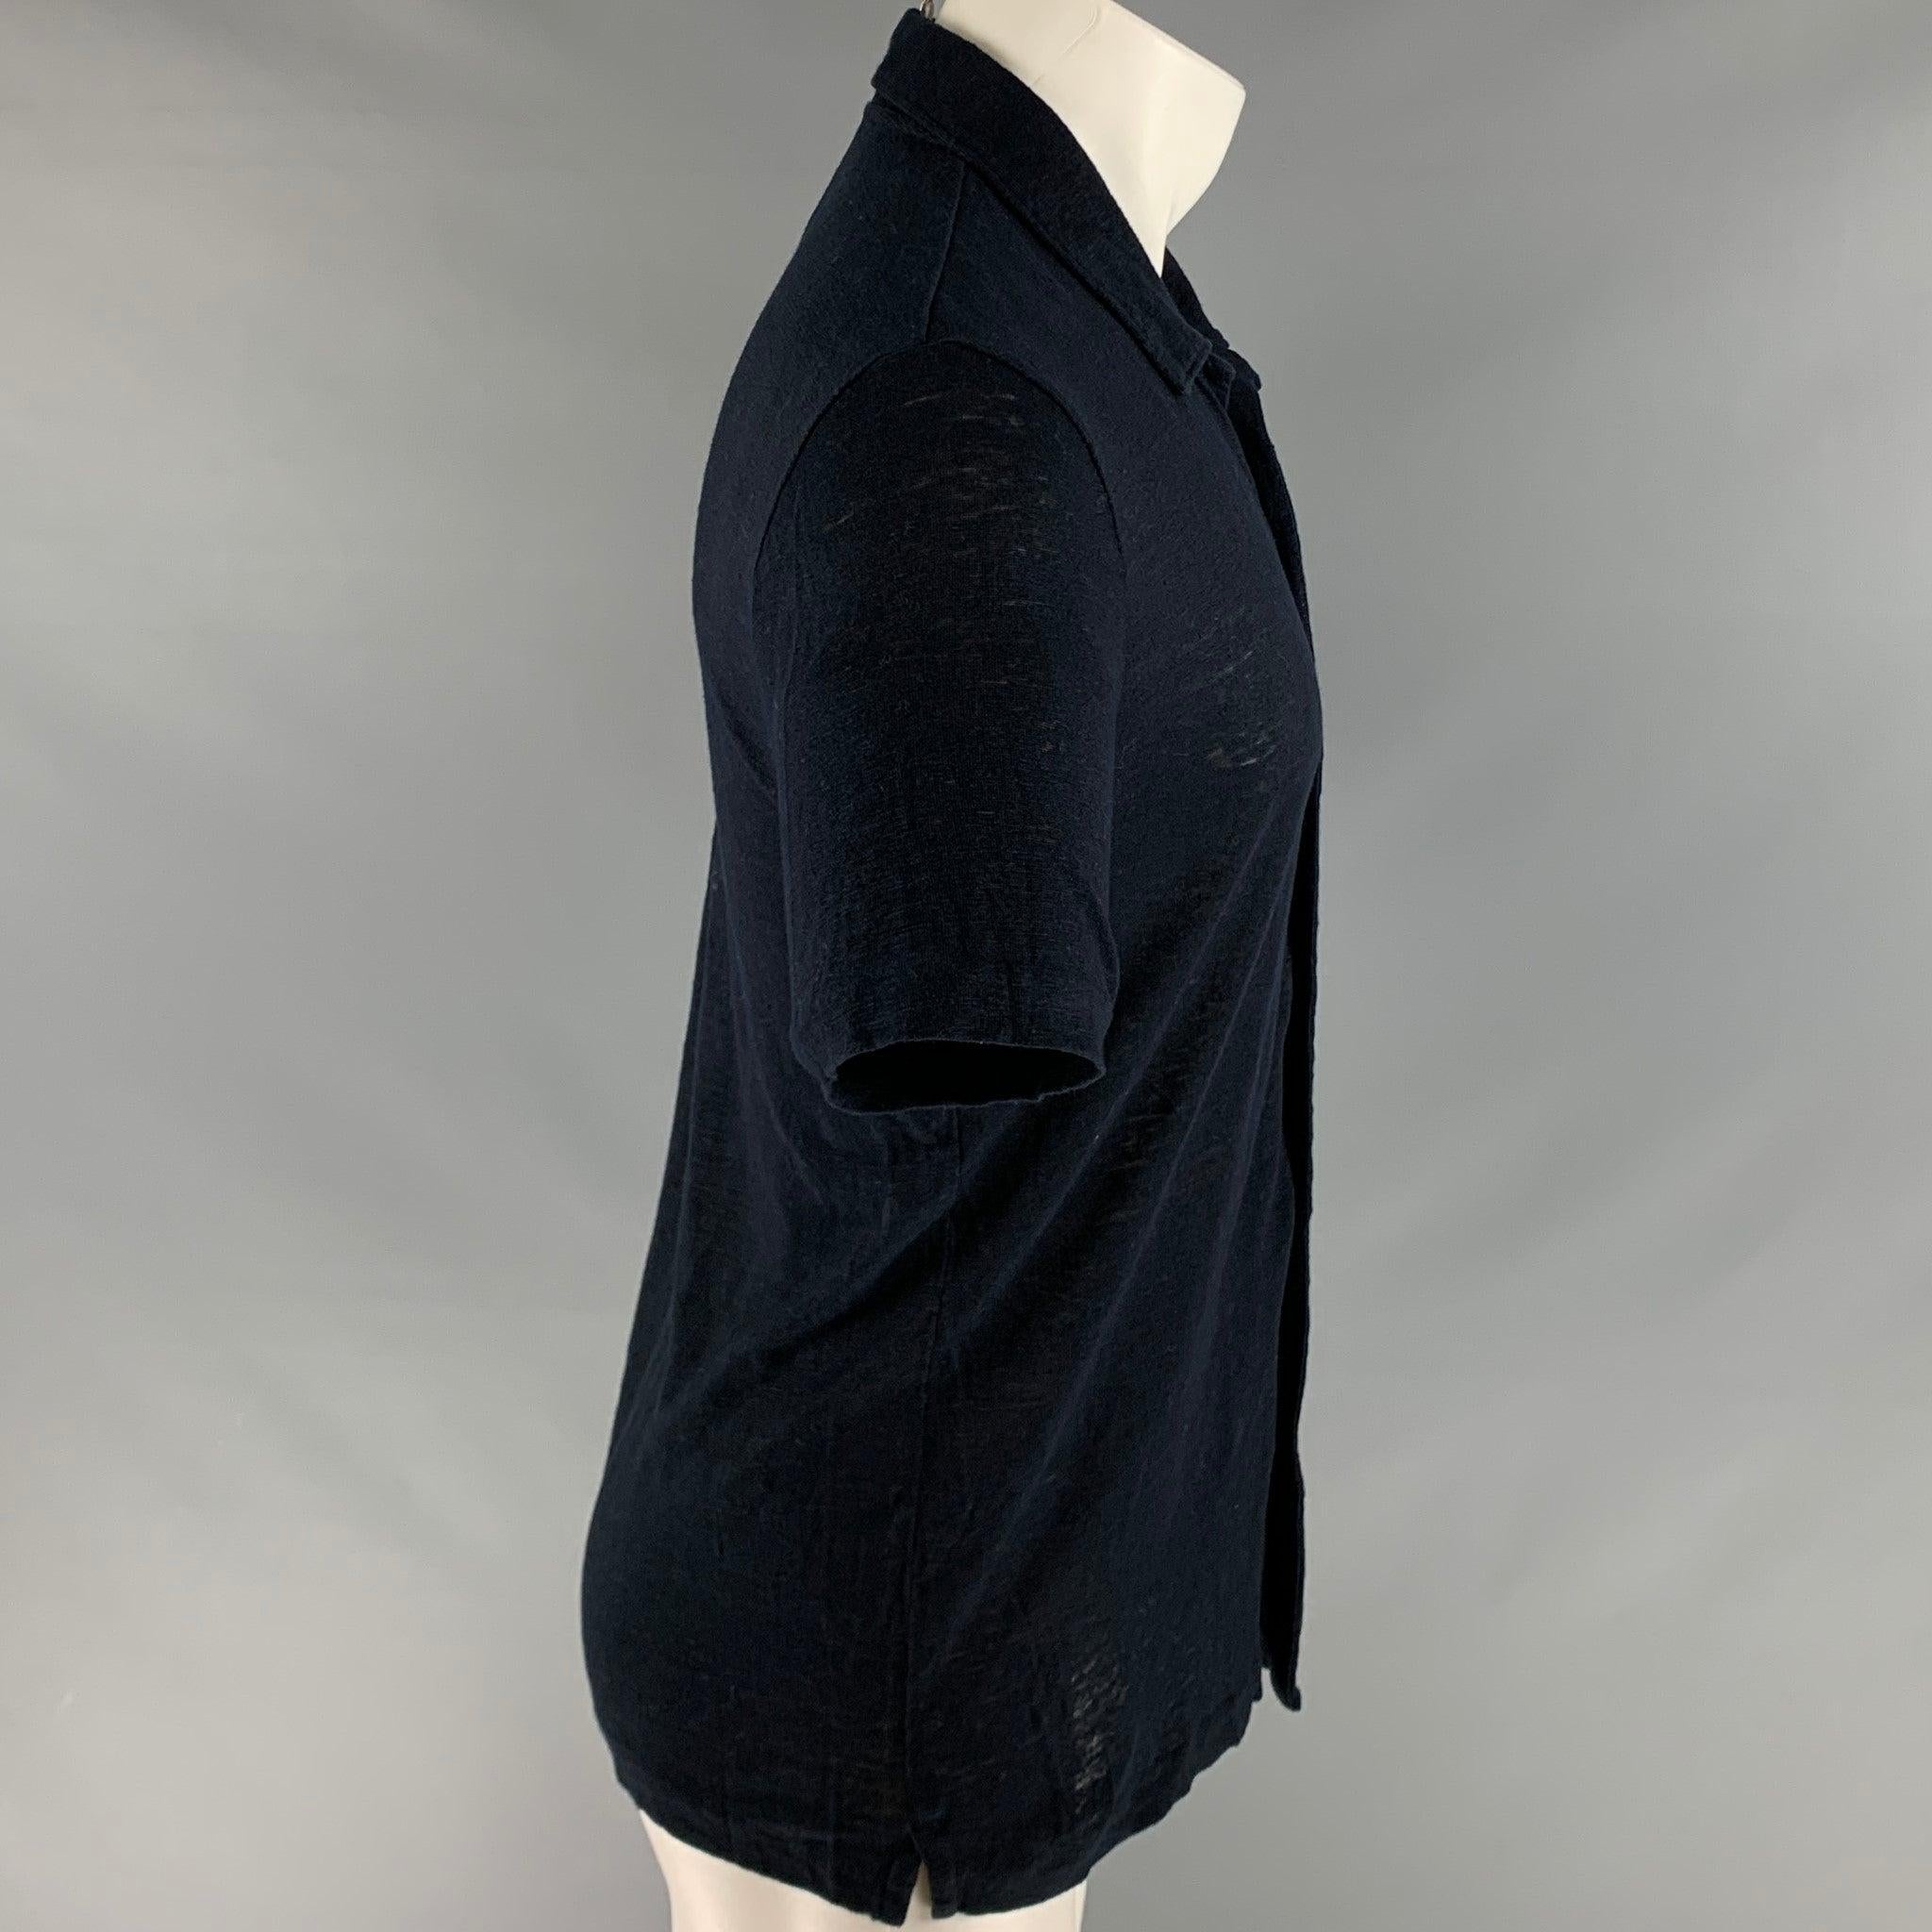 THEORY short sleeve shirt
in a black linen jersey featuring a camp style, one pocket, and a button closure.Excellent Pre-Owned Condition. 

Marked:   M 

Measurements: 
 
Shoulder: 16.5 inches Chest: 40 inches Sleeve: 9 inches Length: 27 inches 
  
